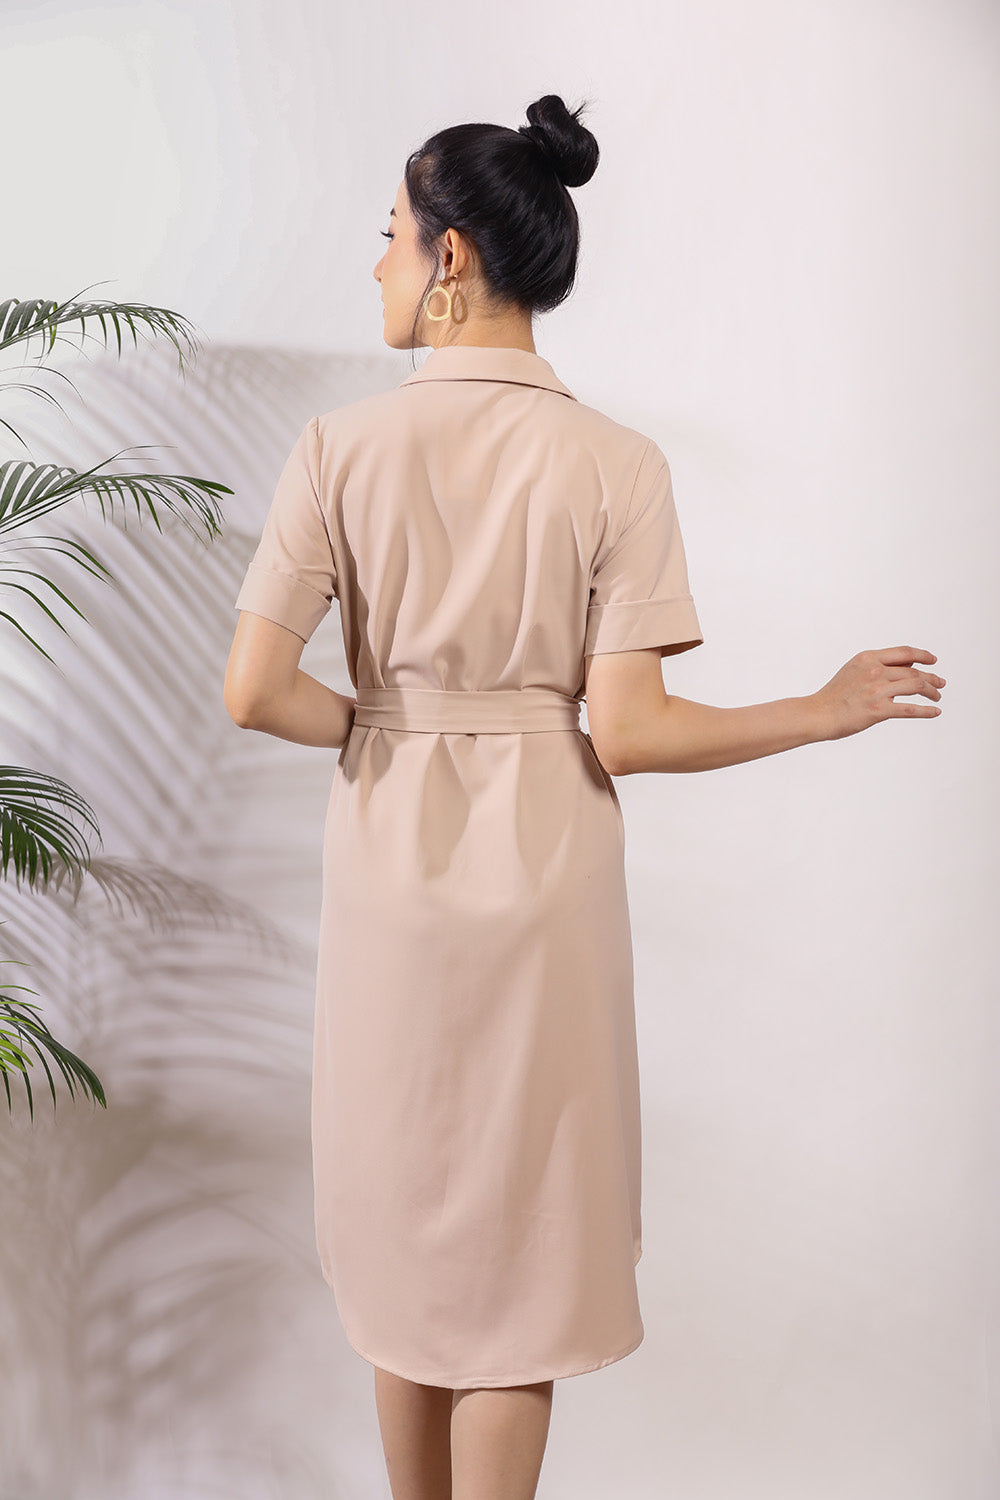 Eularia Dresss in Apricot